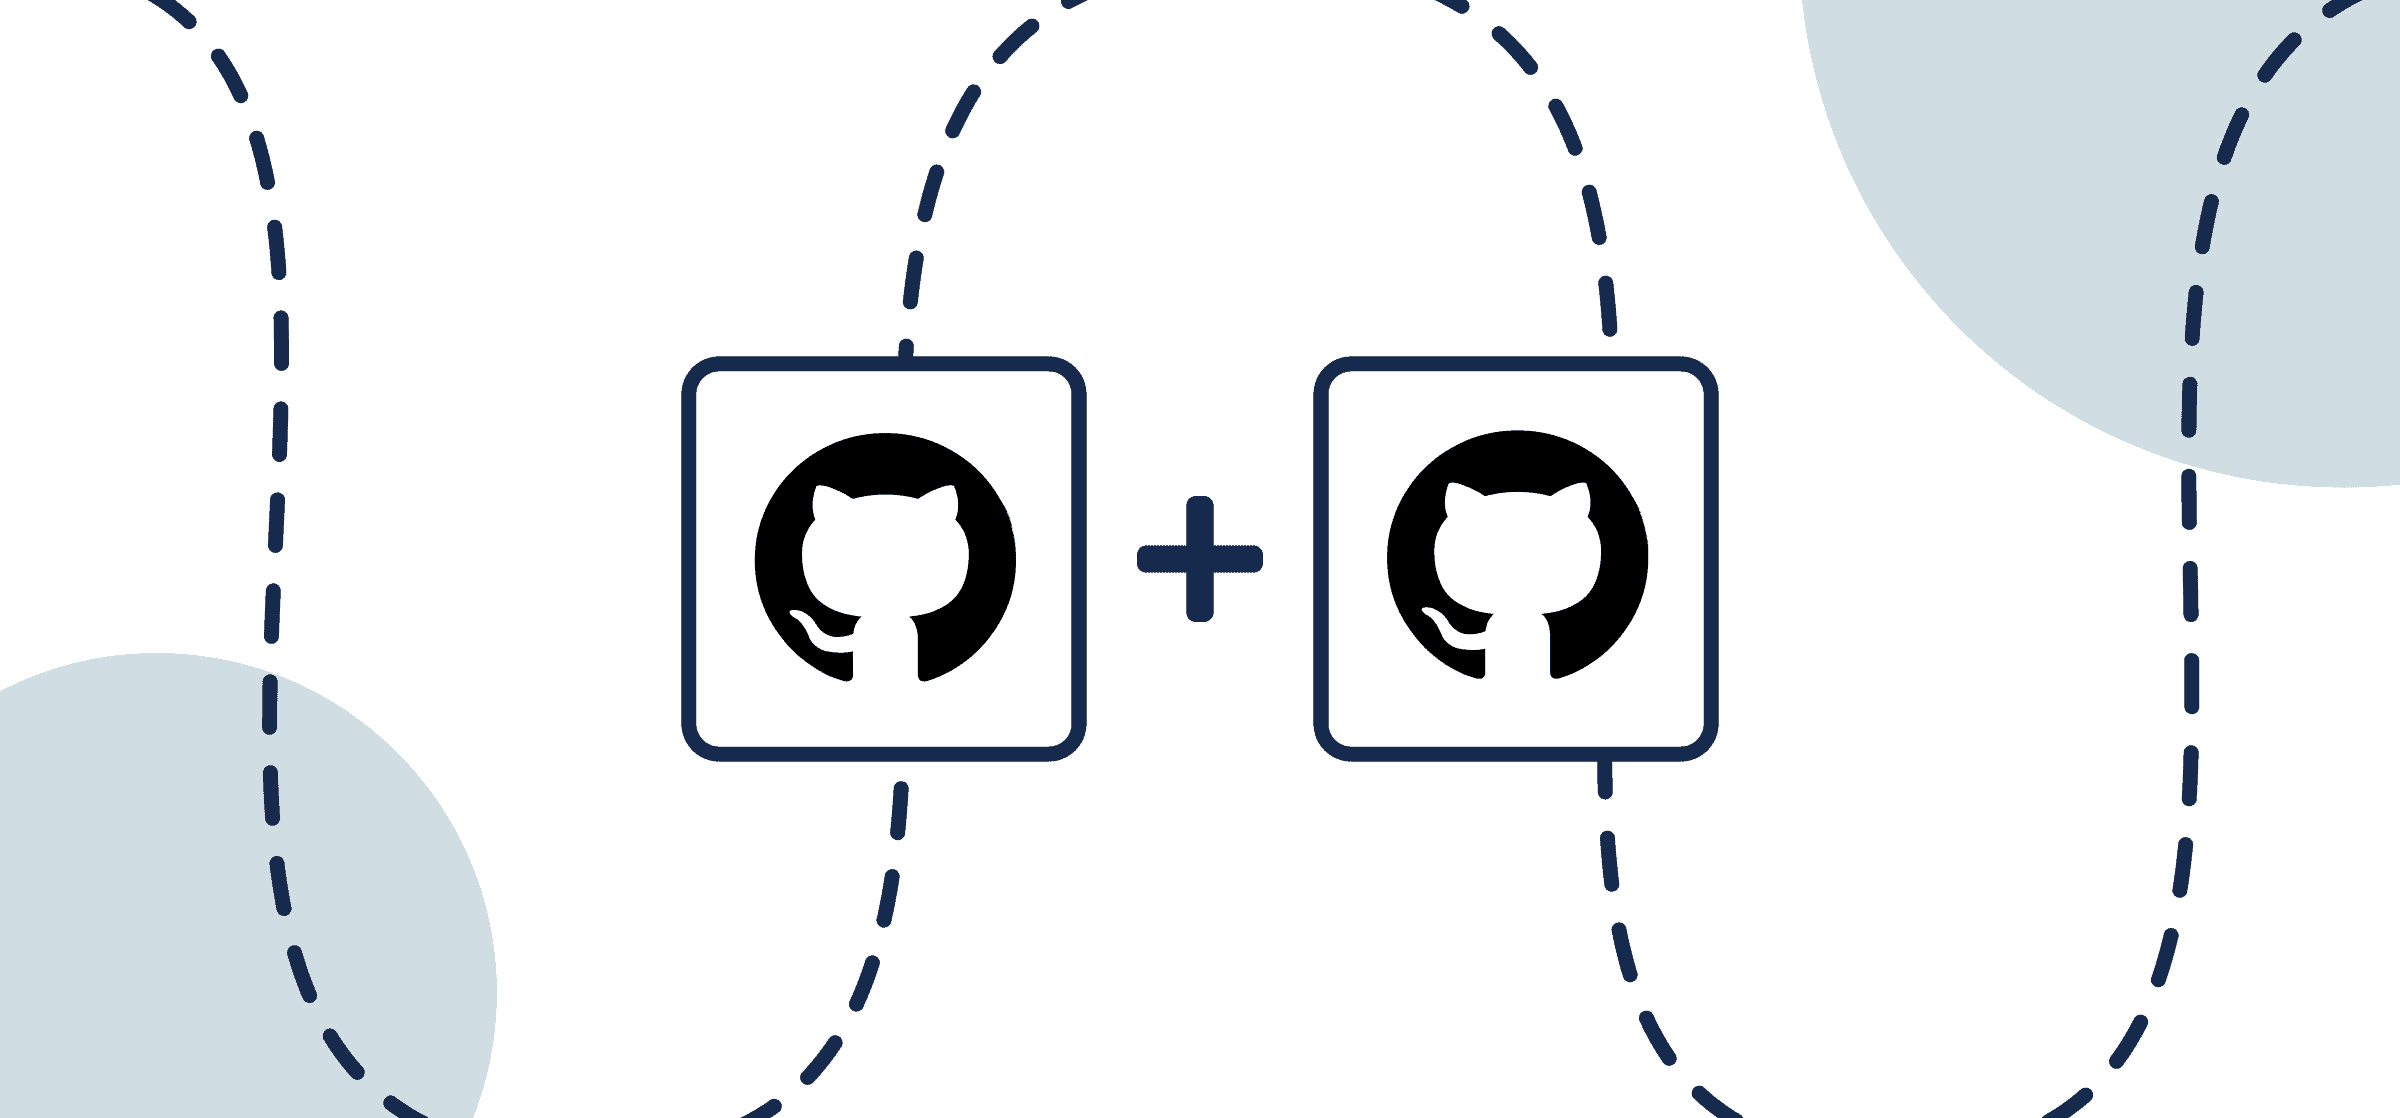 Featured image illustrating a step-by-step guide on syncing one GitHub repository to another through Unito, depicted by the connected GitHub logos through circles and dotted lines.